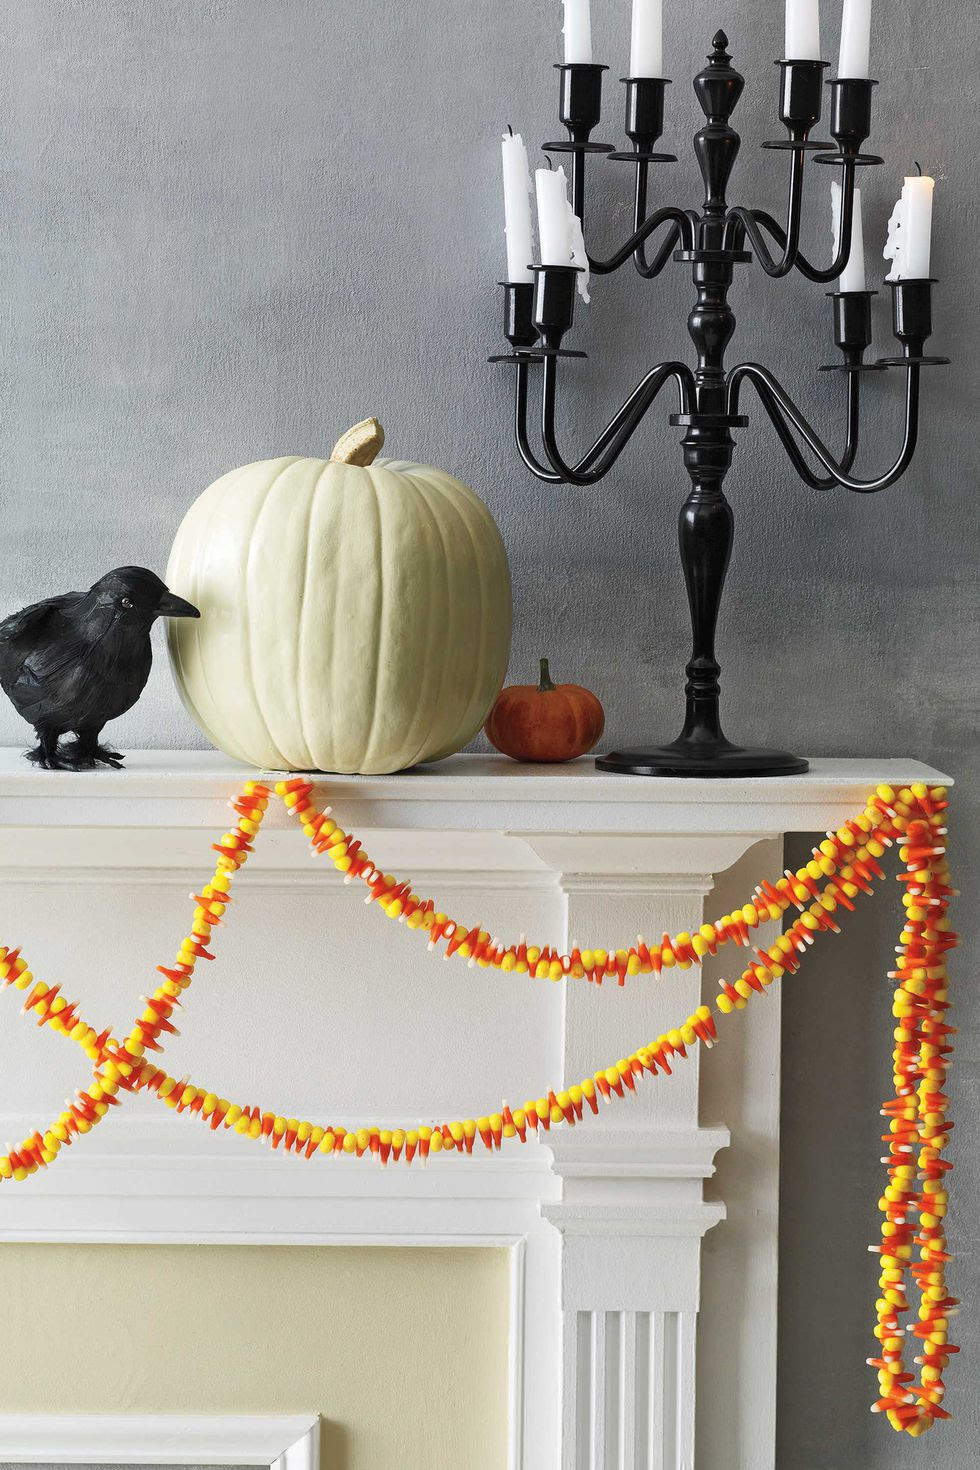 15 Adorable DIY Halloween Decor Ideas To Add To Your ...